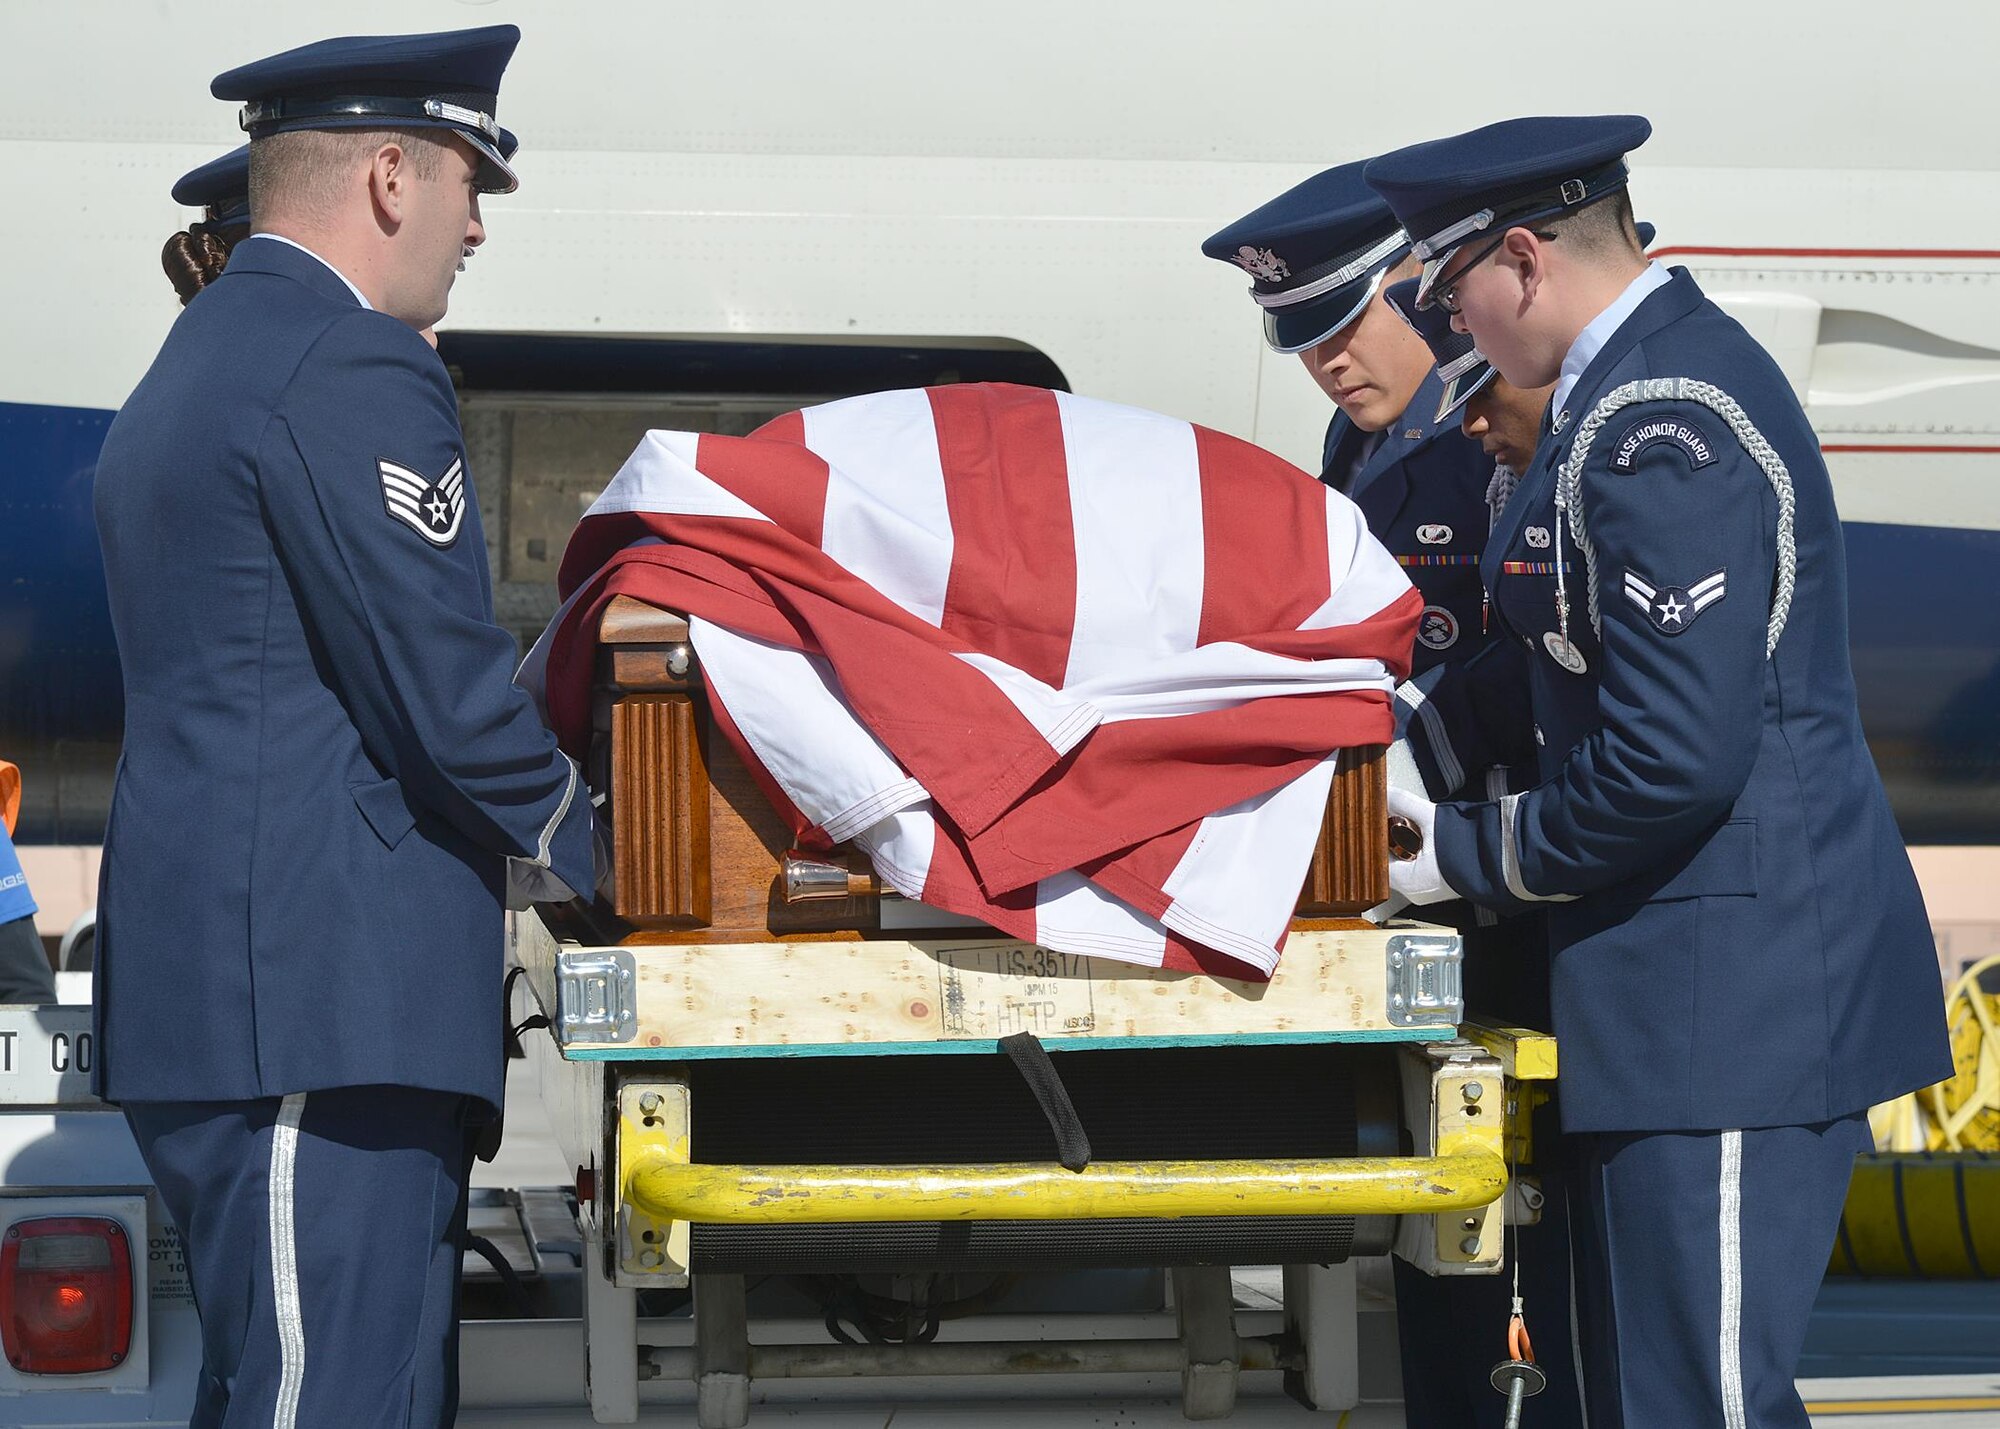 Kirtland Air Force Base Honor Guard members act as pallbearers for Tech. Sgt. Nicholas Heck on Nov. 18 as his remains arrive at the Albuquerque International Sunport en route to Cannon Air Force Base for the funeral. This dignified arrival, the primary mission of honor guards, was the first
KAFB Honor Guard has performed in many years. Six Honor Guard members act as pallbearers and a seventh renders a salute. Heck was stationed at Cannon before transferring to Yakota Air Base, Japan, where he died.